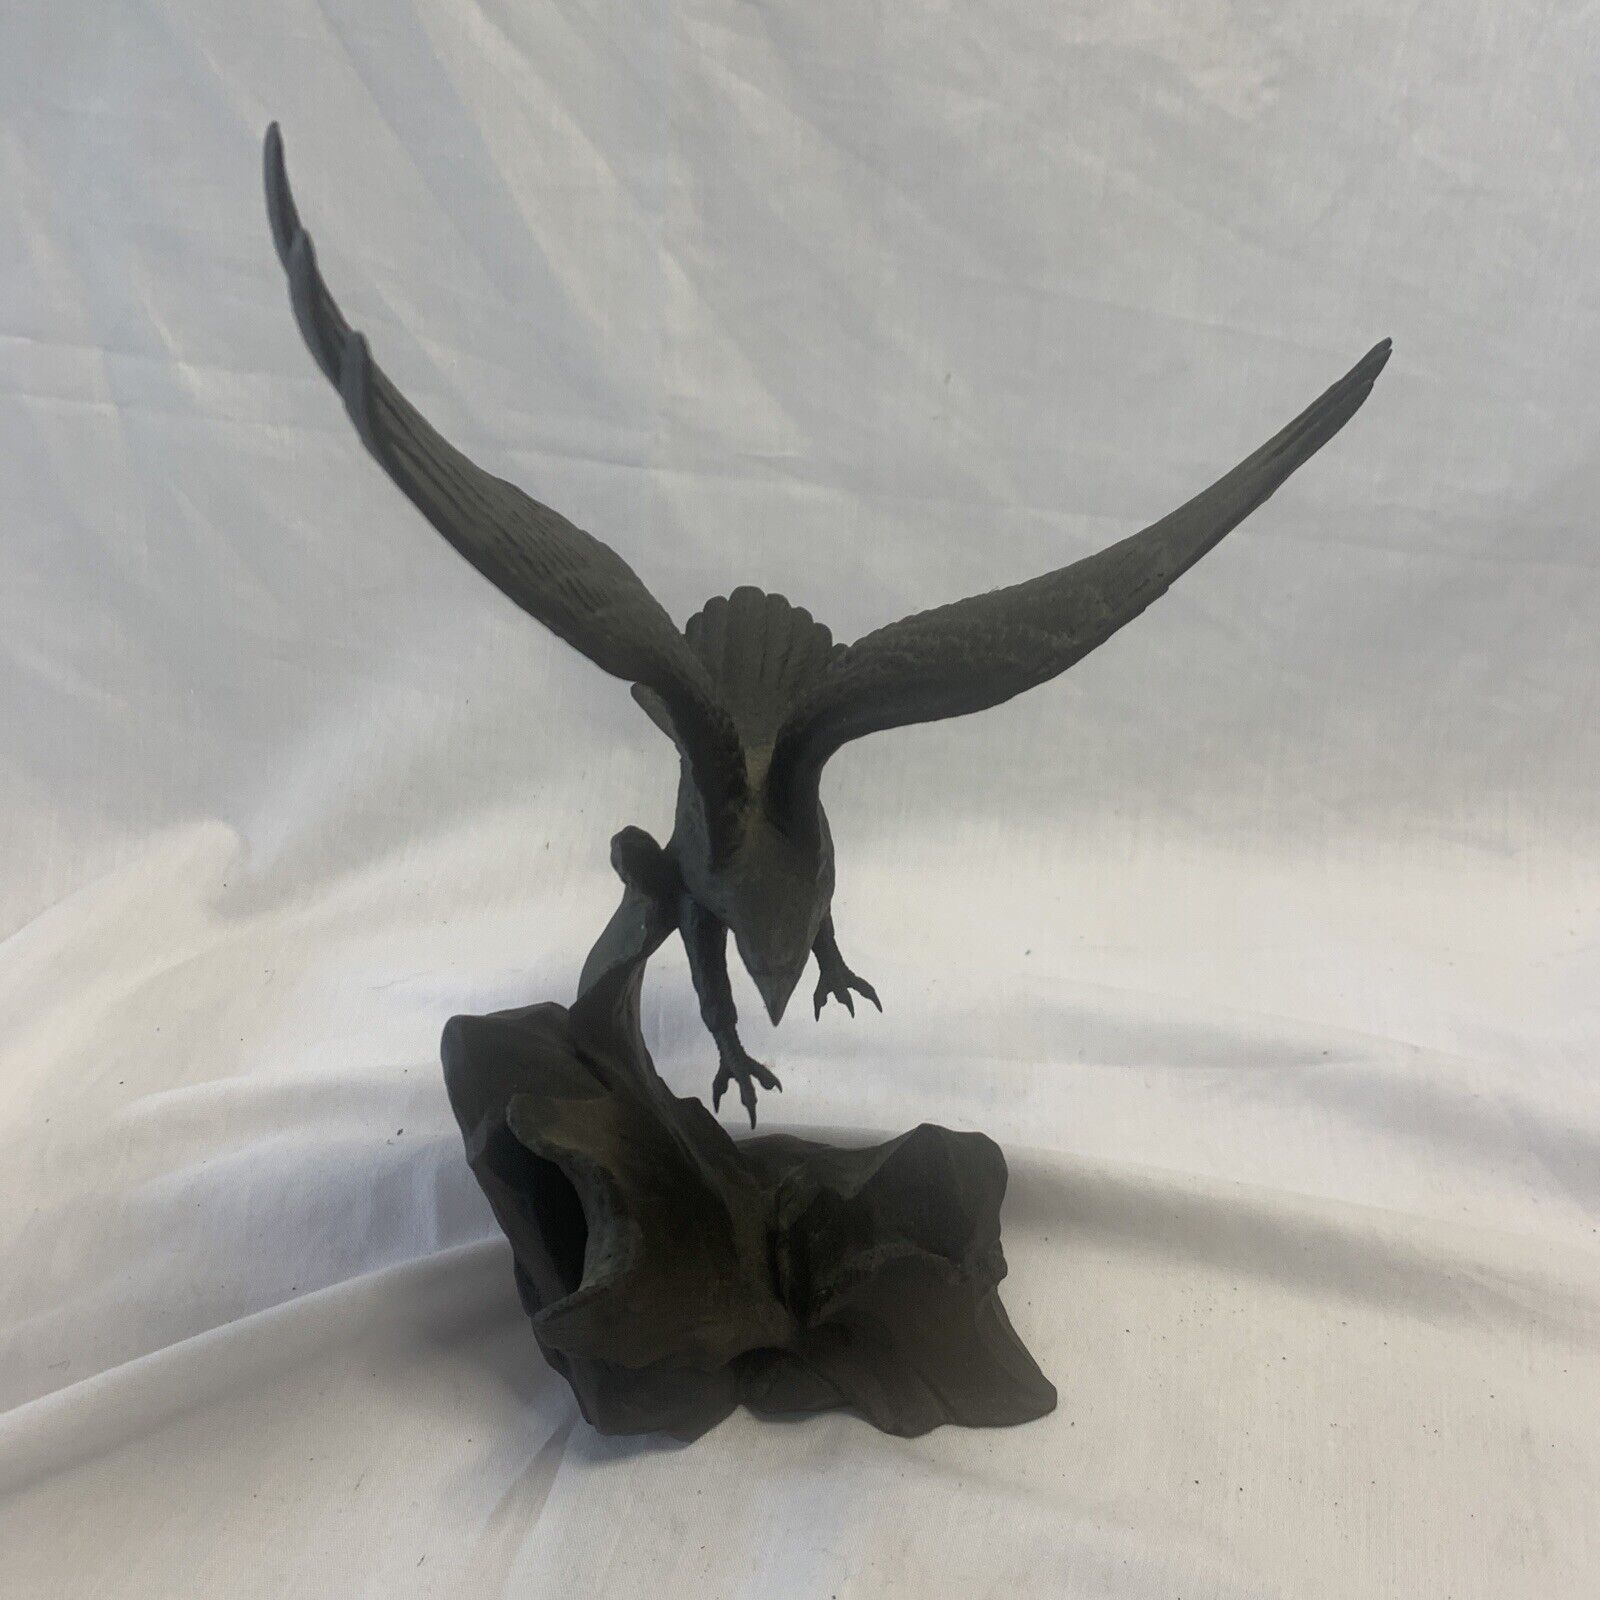 Wings of glory in solid bronze by Ronald van Ruyckevelt 1990